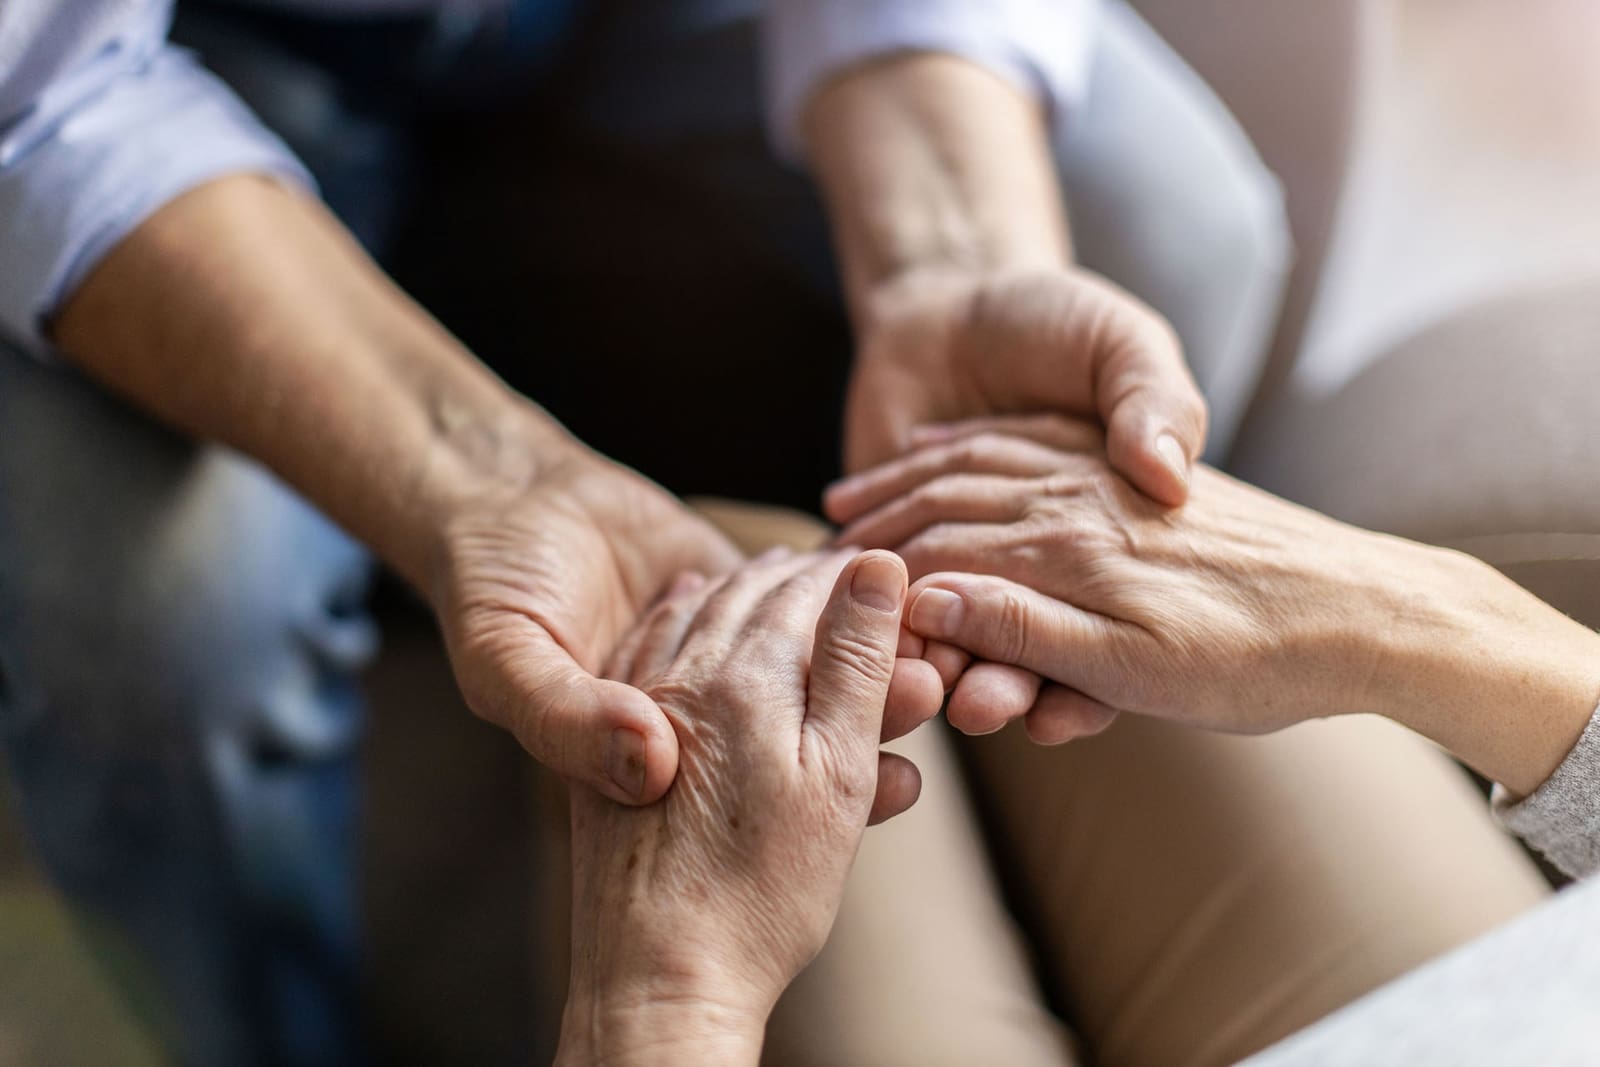 Young person holding the hands of an older person in a comforting manner